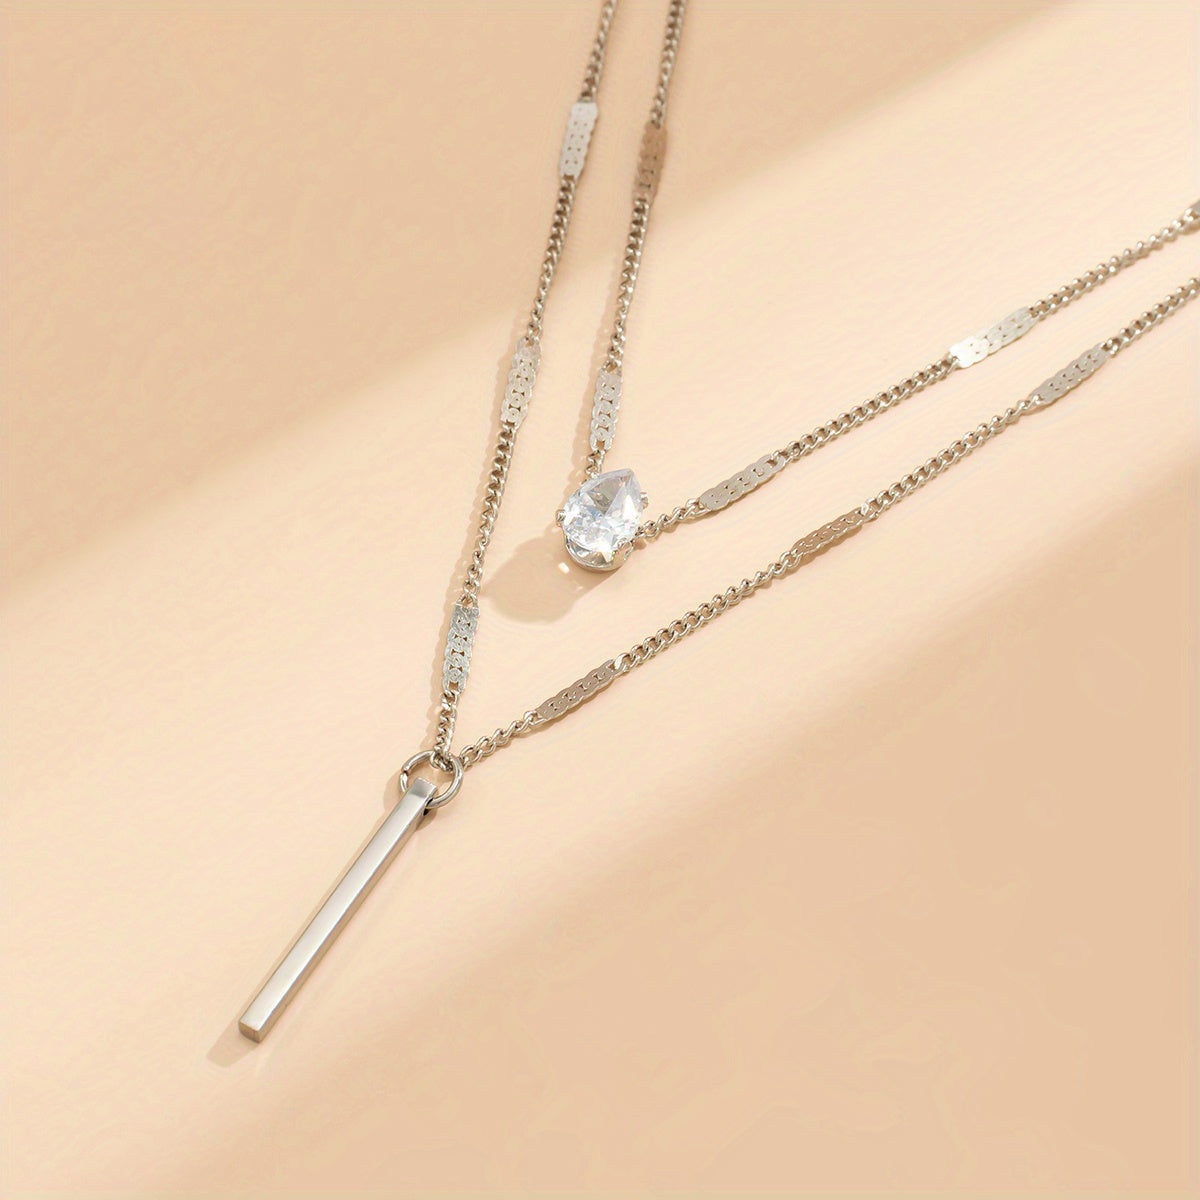 Gorgeous 2-Piece Love Triangle Water Drop Necklace with Zircon Inlay - Perfect for Any Occasion!